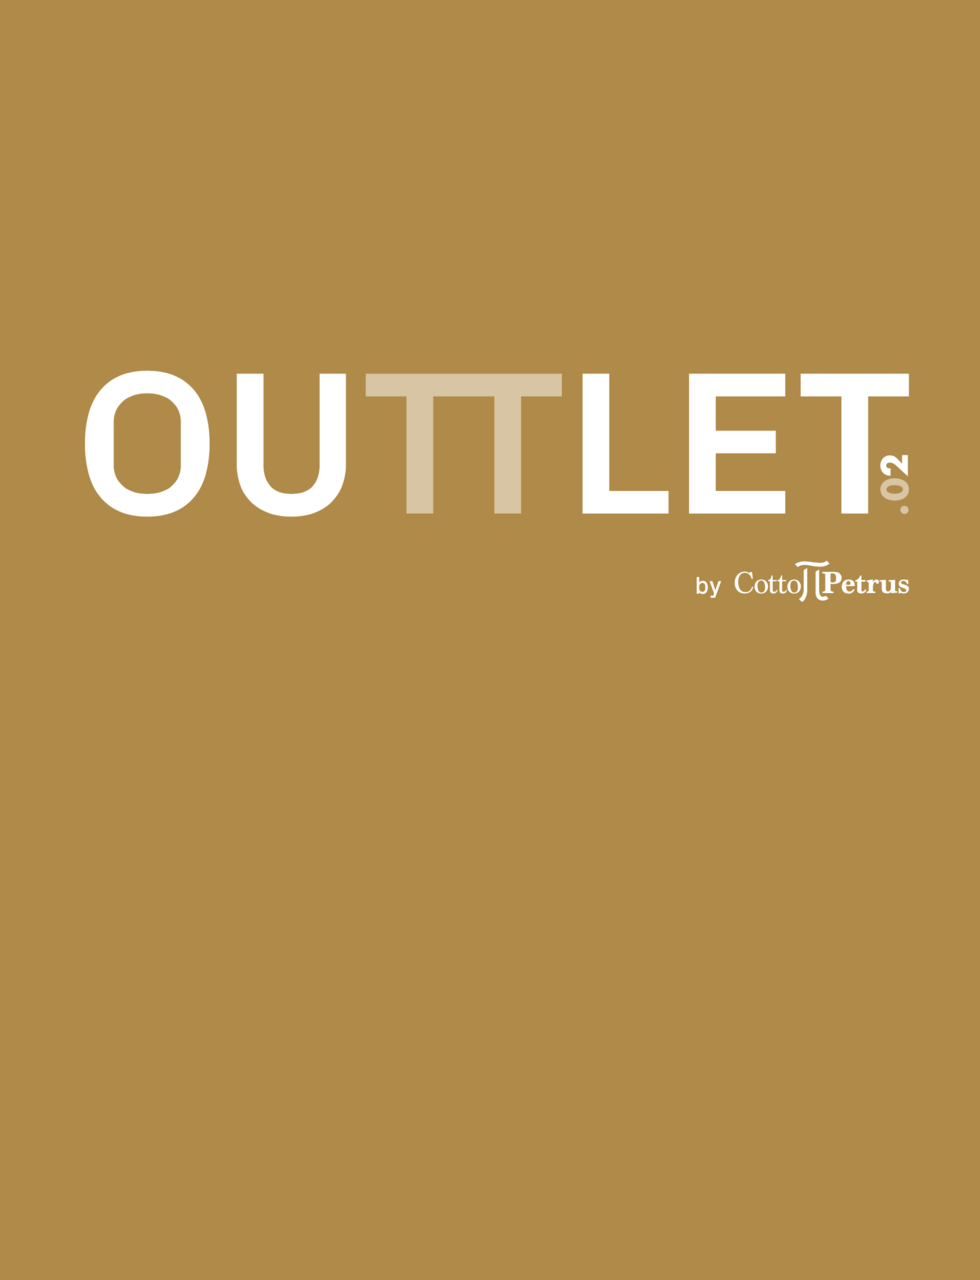 Nuovo Catalogo Outtlet 2.0